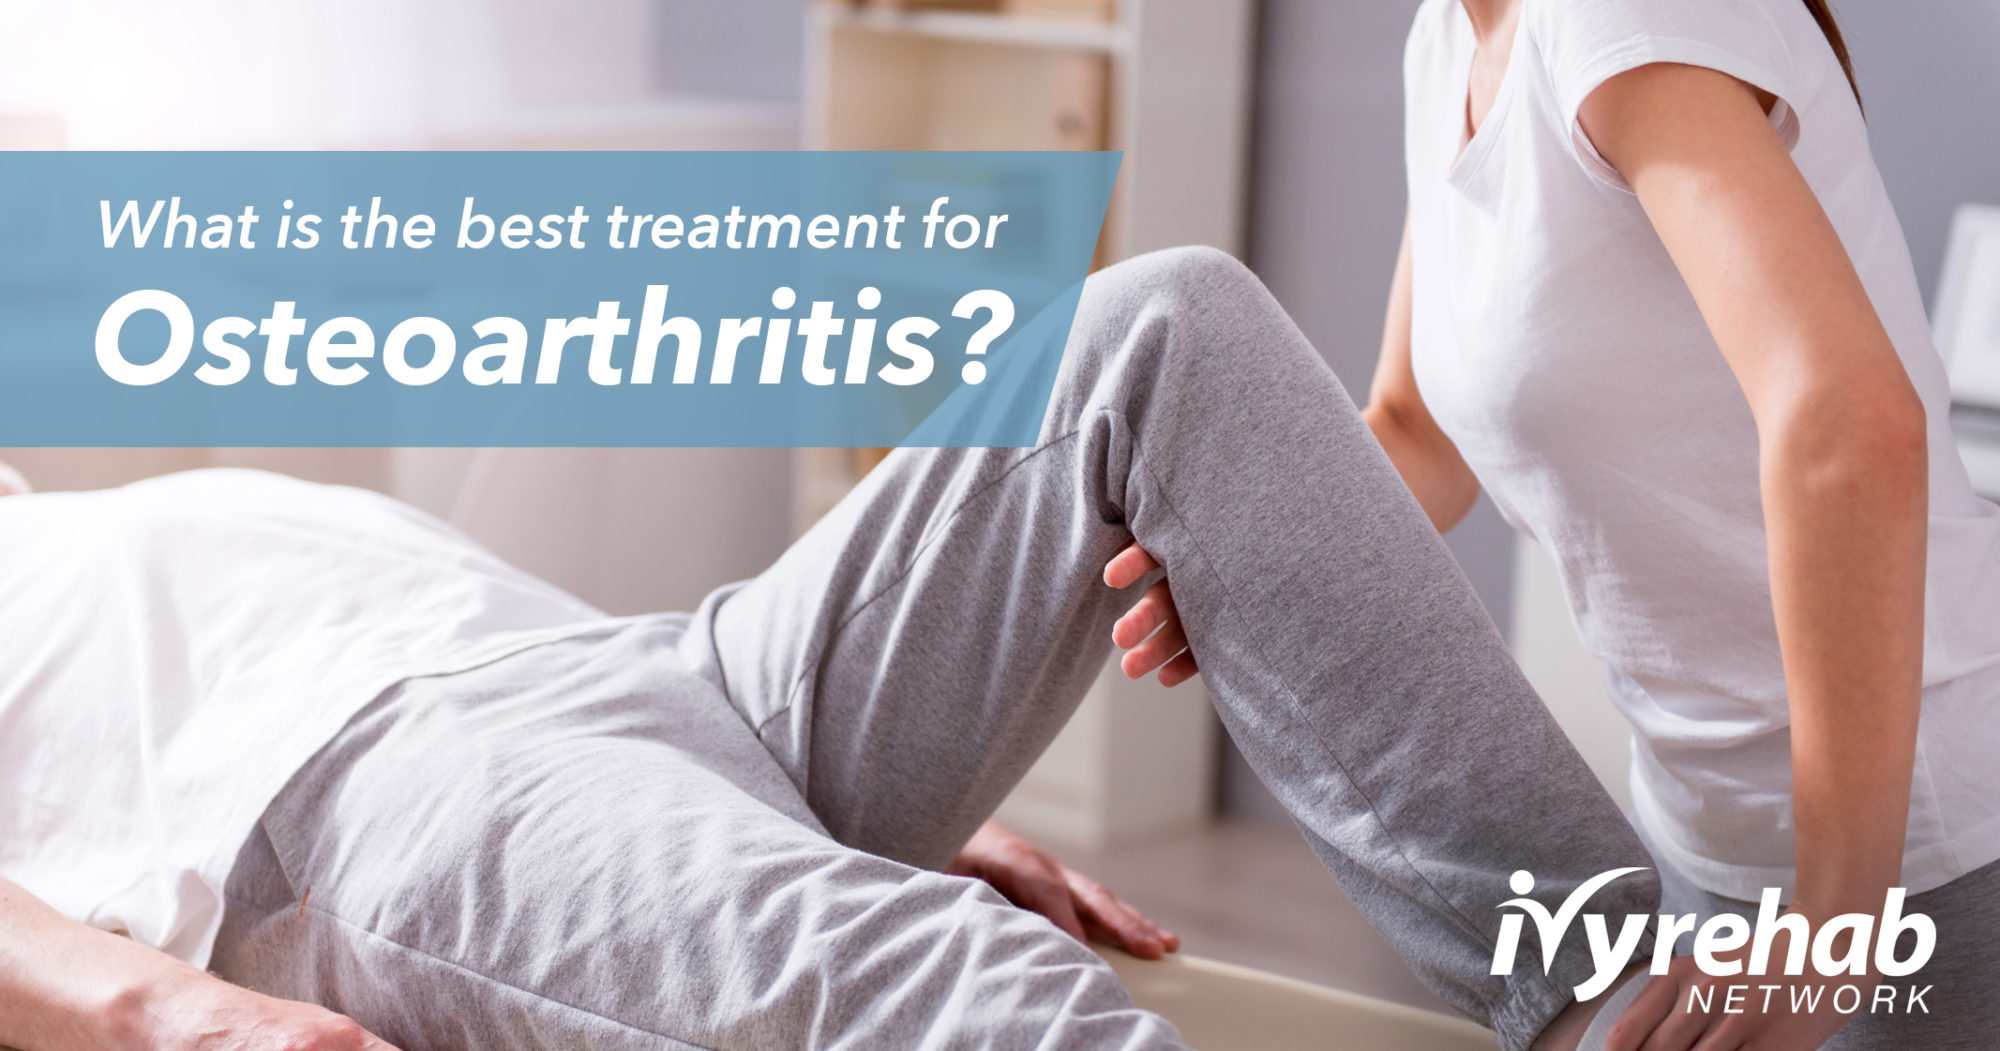 What is the Best Treatment for Osteoarthritis? Ivy Rehab